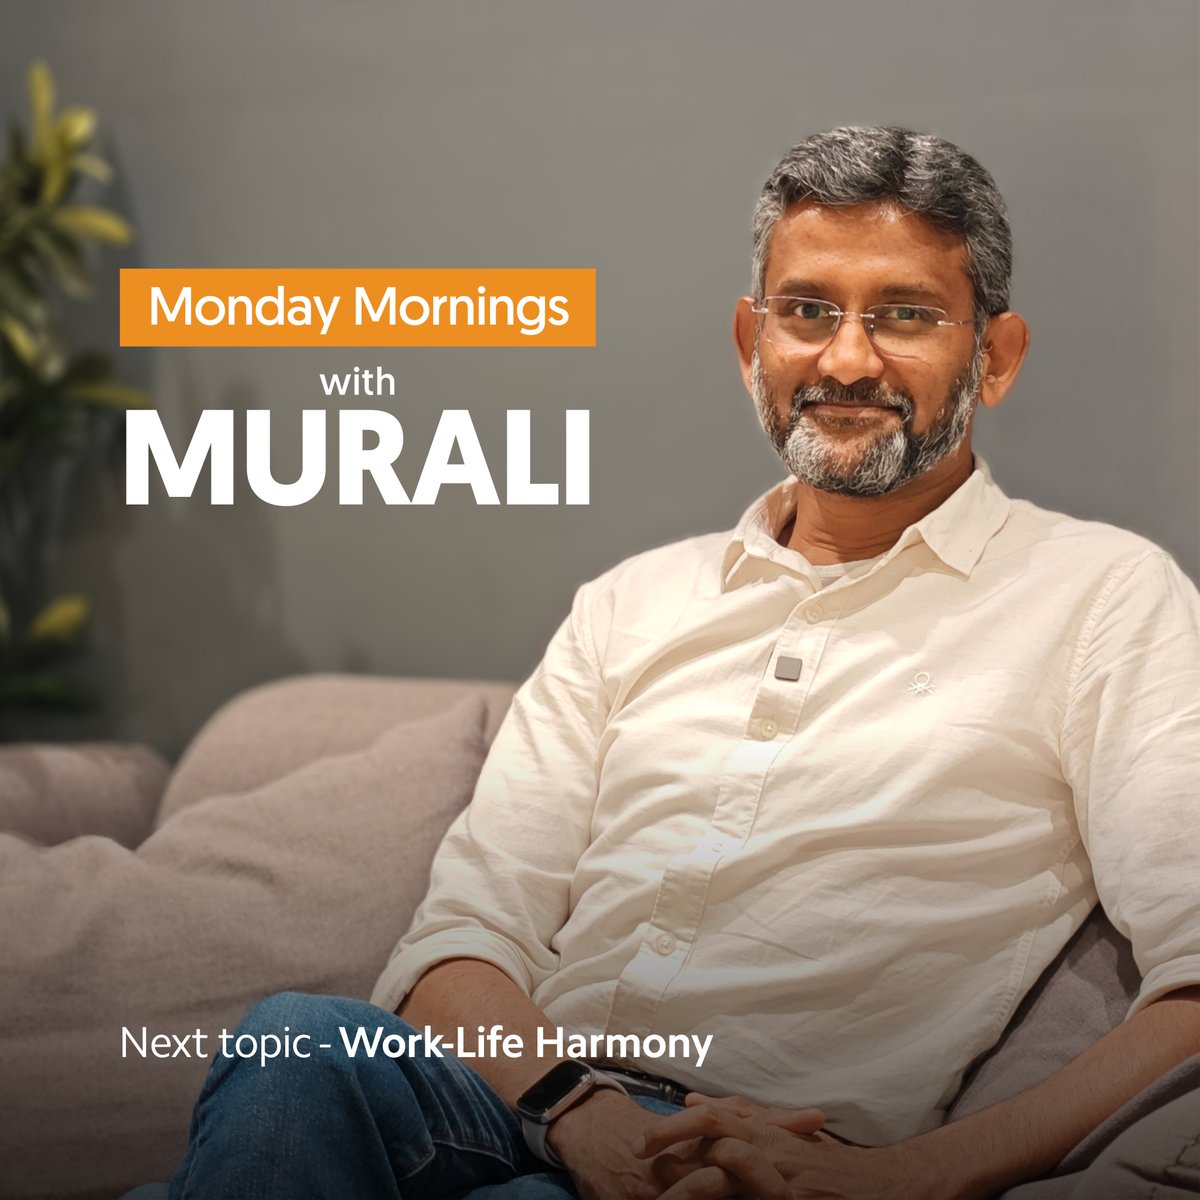 Thank you to everyone for joining the #MondayMorningsWithMurali sessions on #Leadership 🙏 Your thoughtful questions drove insightful discussions. Your curiosity and engagement are truly appreciated. Checkout the videos here: youtube.com/playlist?list=… I'm thrilled to announce our